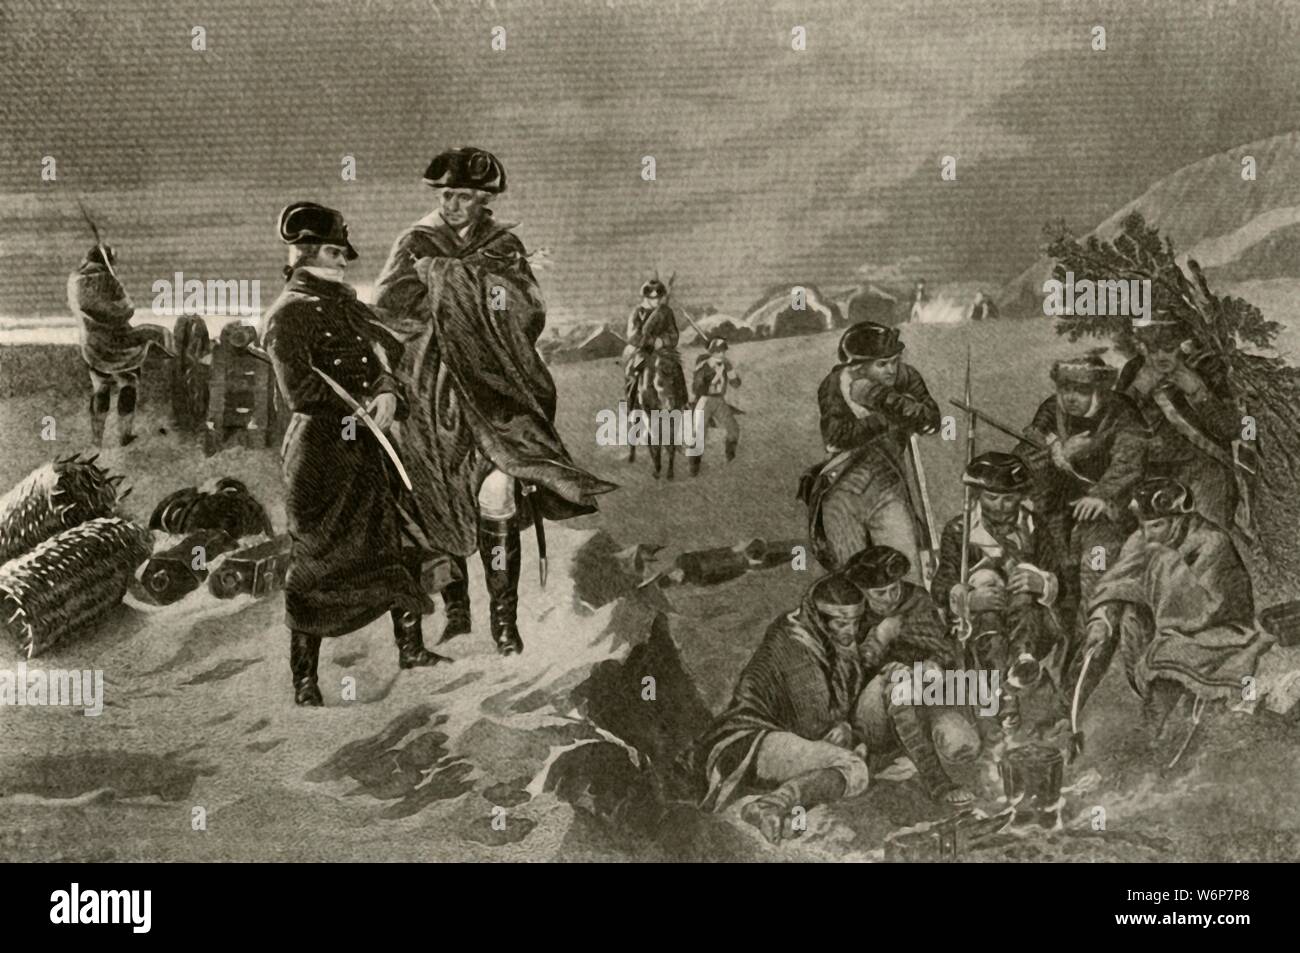 'Picture of the Camp at Valley Forge, showing military cloak and great coat worn by the officers and the Dutch blankets worn by the private soldiers', c1777, (1937). Valley Forge military encampment for the Continental Army was commanded by General George Washington. Troops spent the winter here from December 19, 1777 to June 19, 1778.  From &quot;History of American Costume - Book One 1607-1800&quot;, by Elisabeth McClellan. [Tudor Publishing Company, New York, 1937] Stock Photo